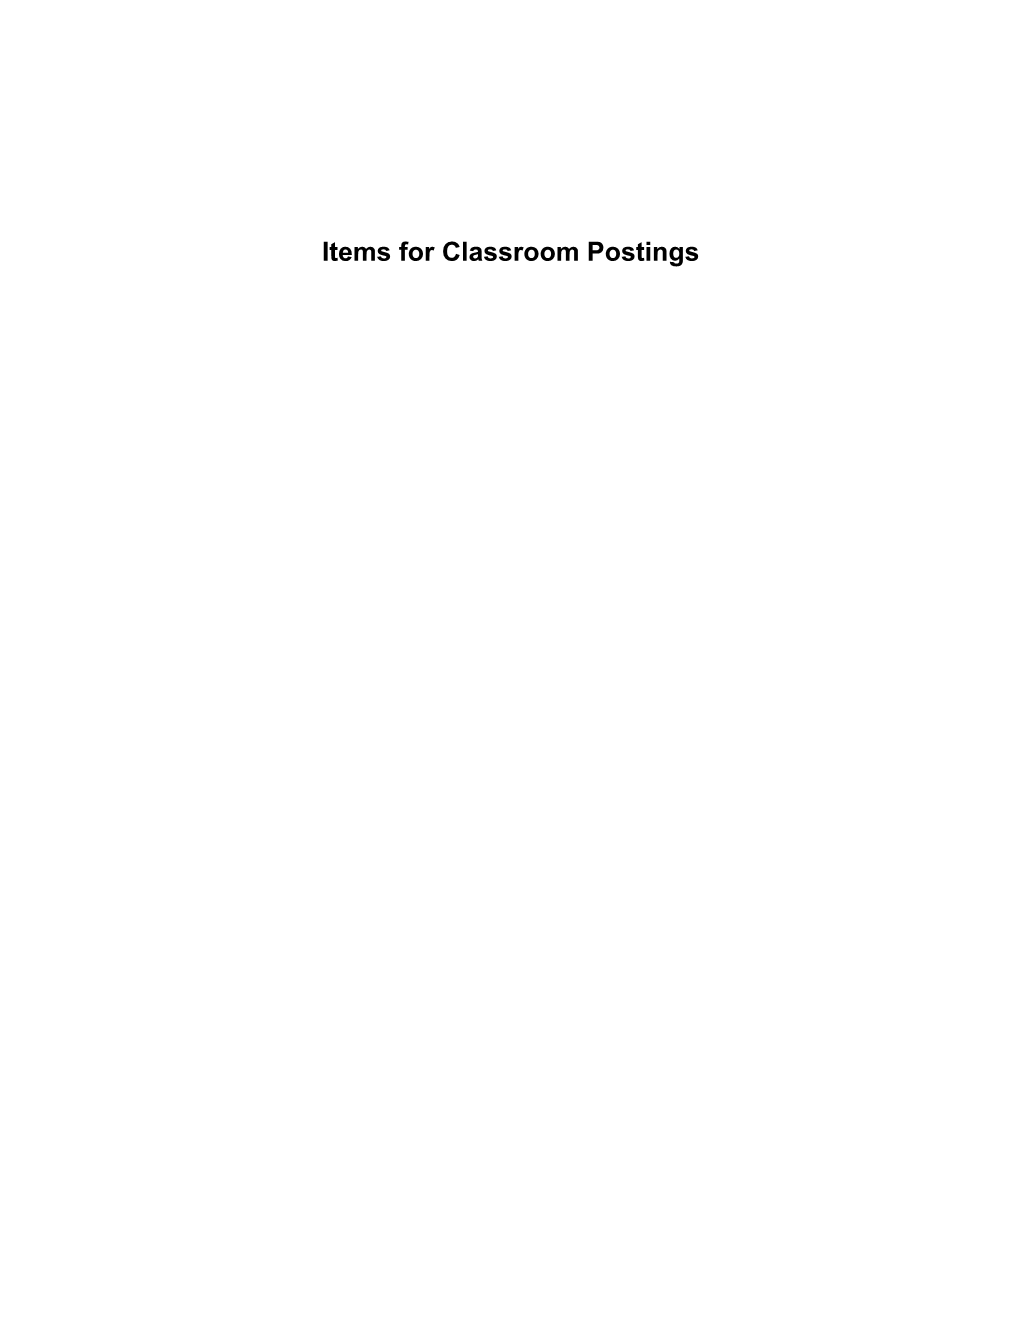 Items for Classroom Postings